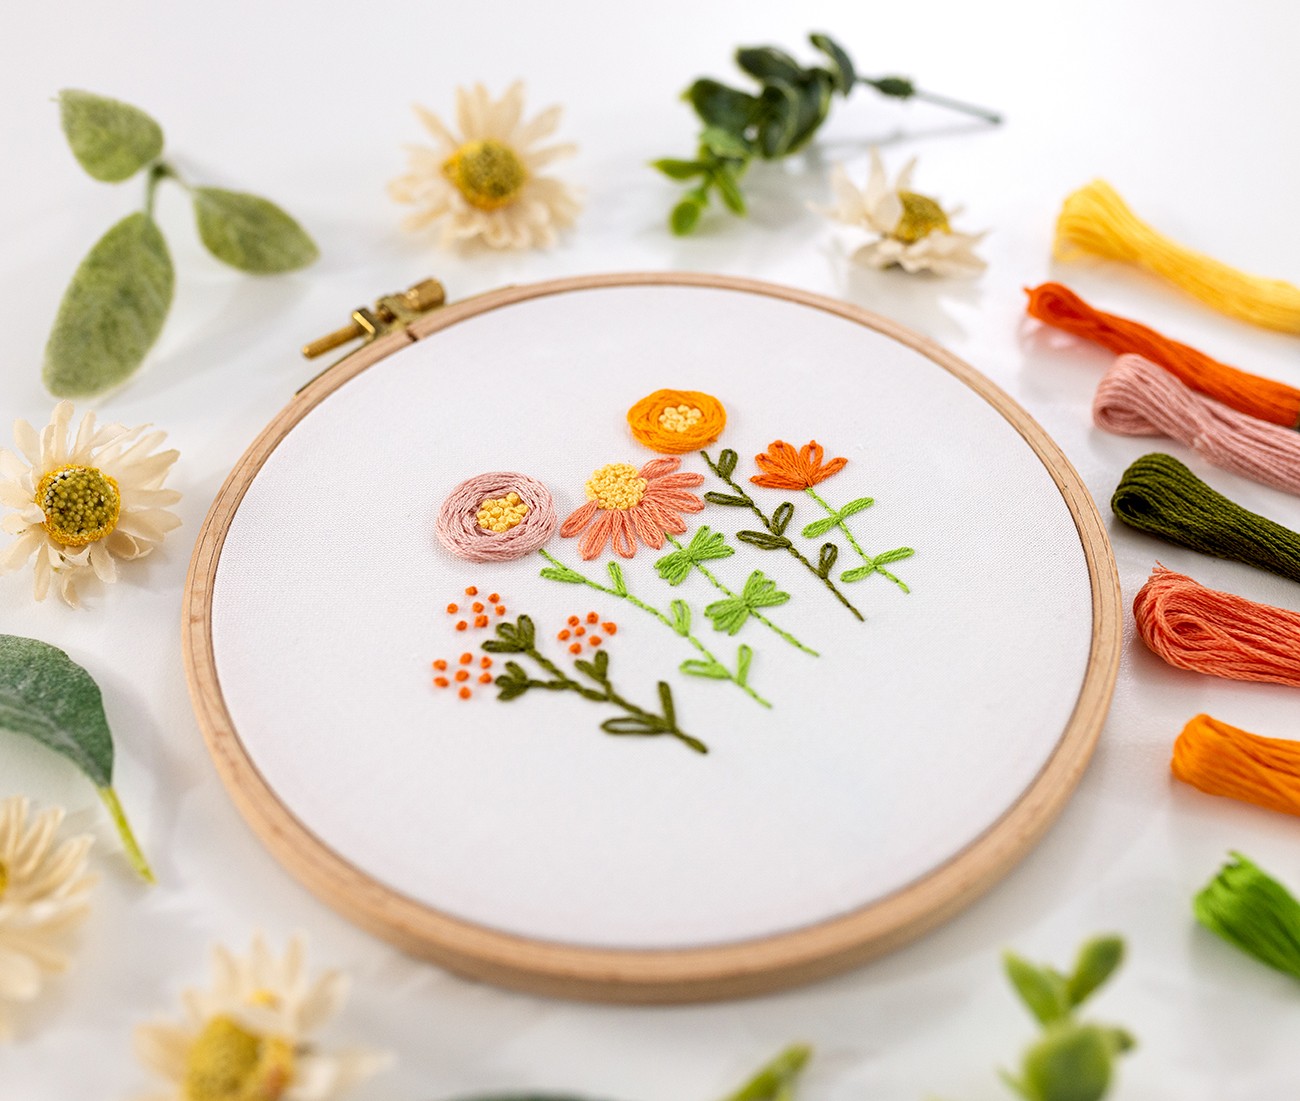 This is an image of the modern embroidery pattern, Little Wildflower Meadow, which uses back stitch in the flower stems.